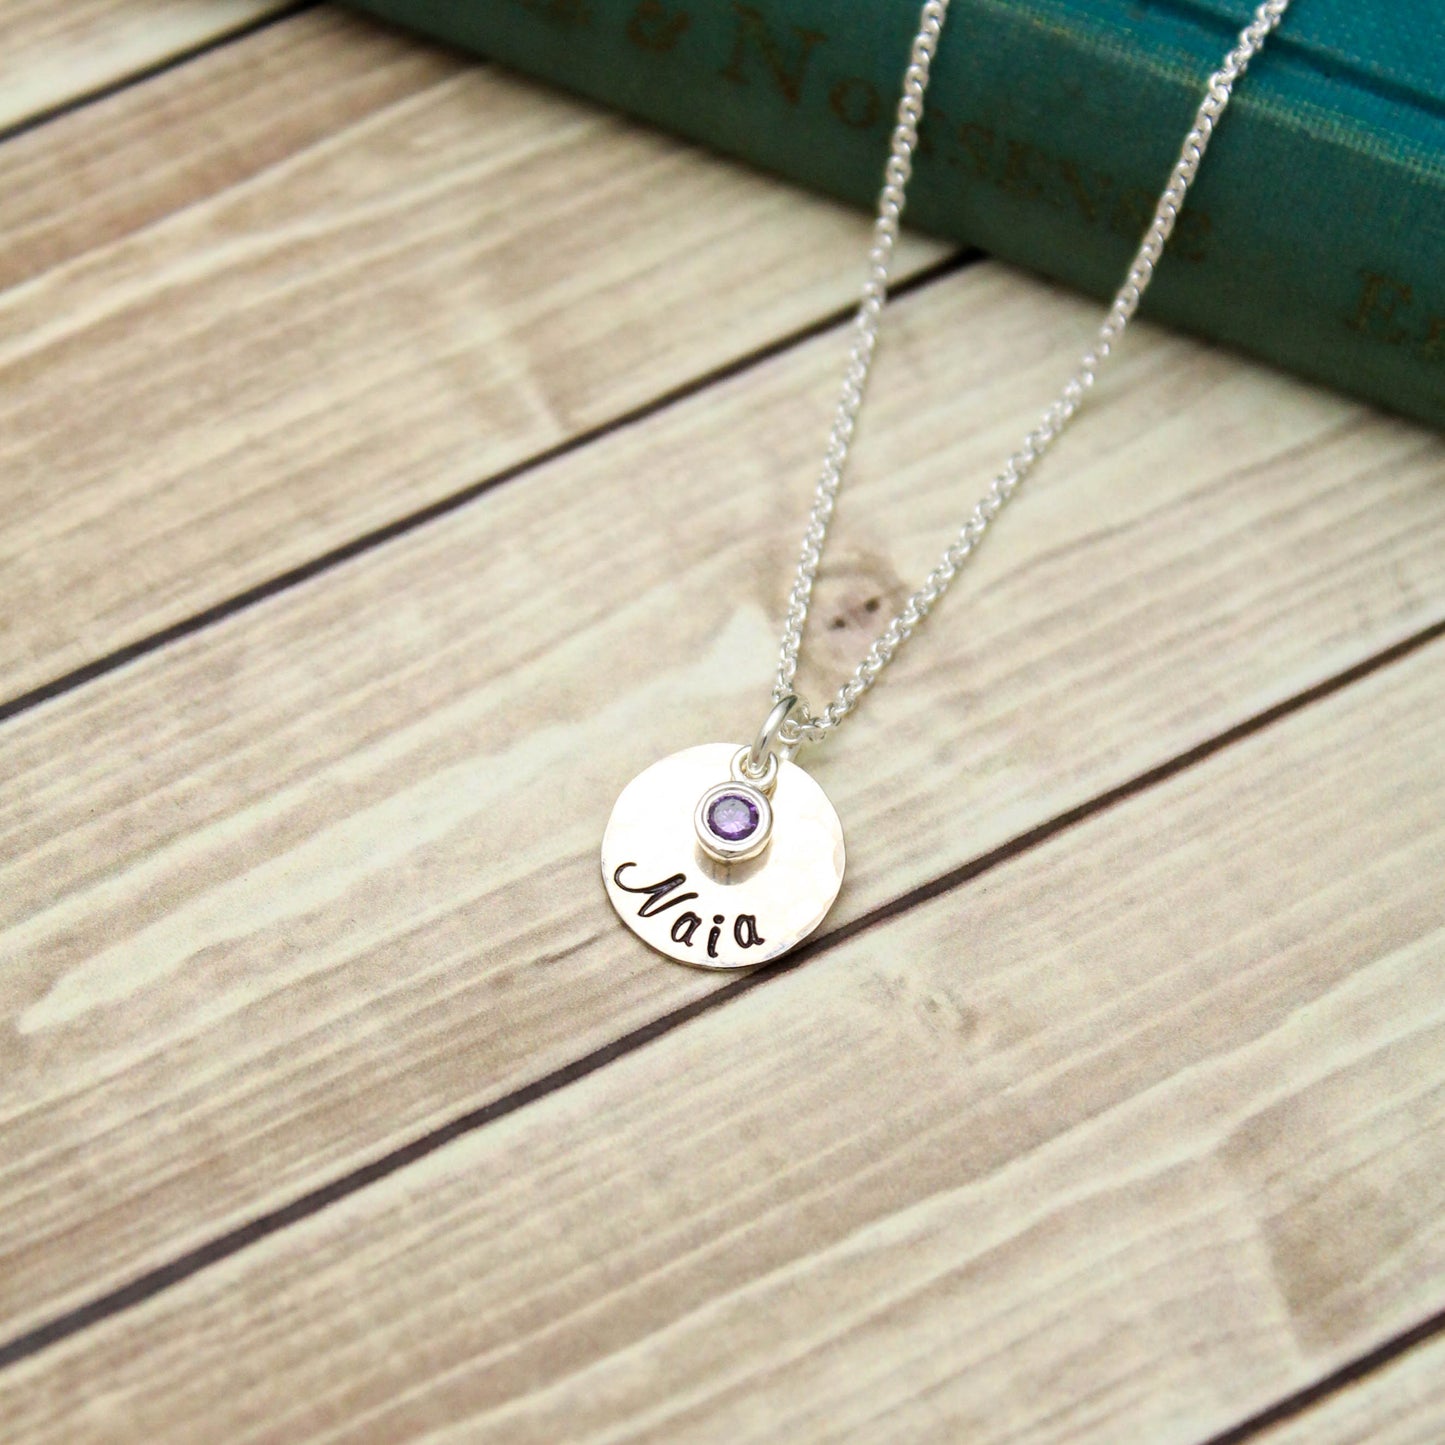 February Birthstone Necklace, Amethyst Jewelry, February Birthday Gift, February Birthstone Jewelry, February Necklace, Sterling Silver